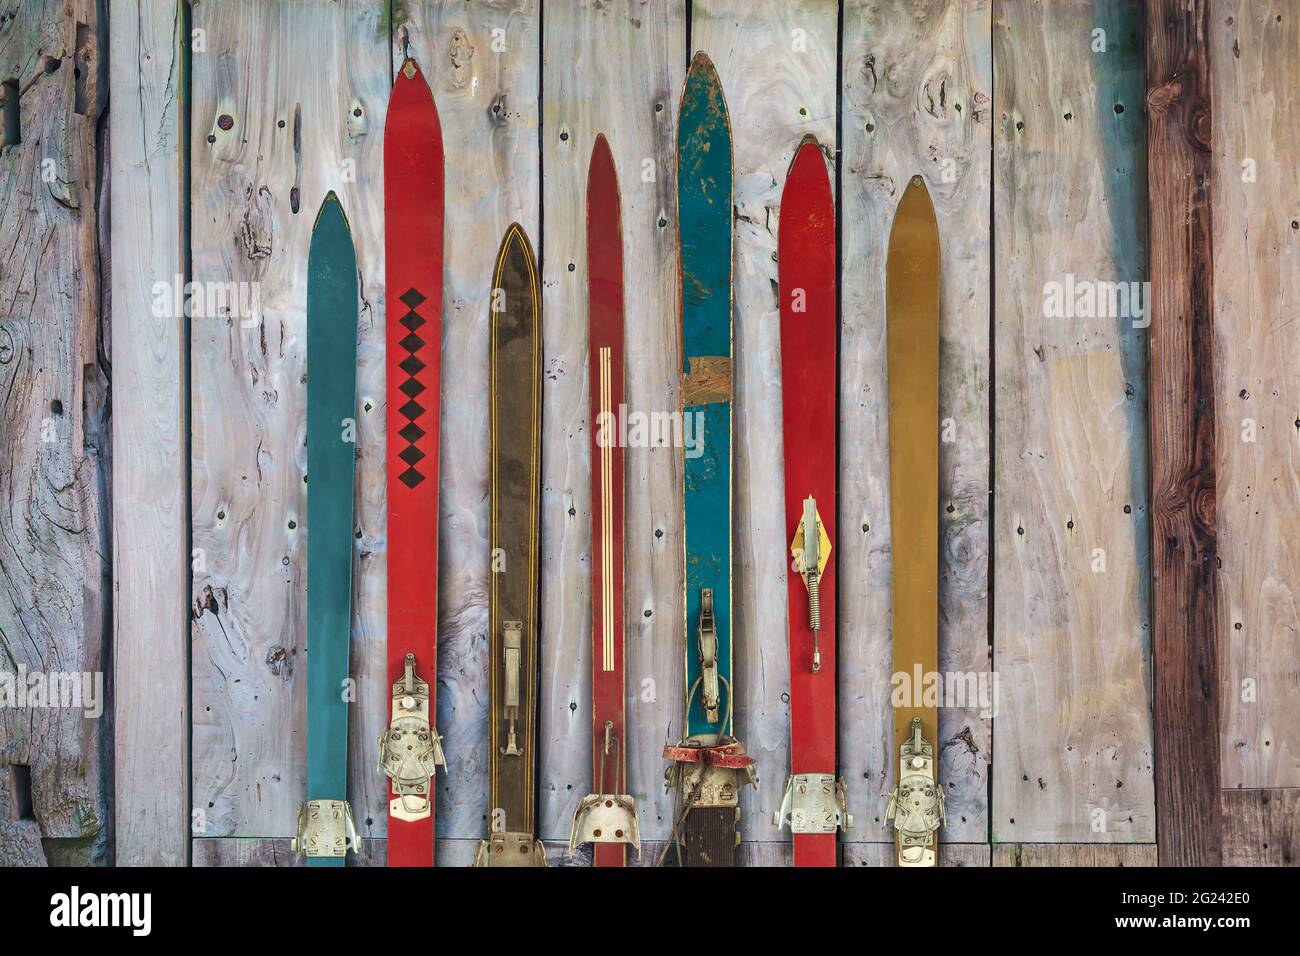 Vintage Wood Ski High Resolution Stock Photography and Images - Alamy